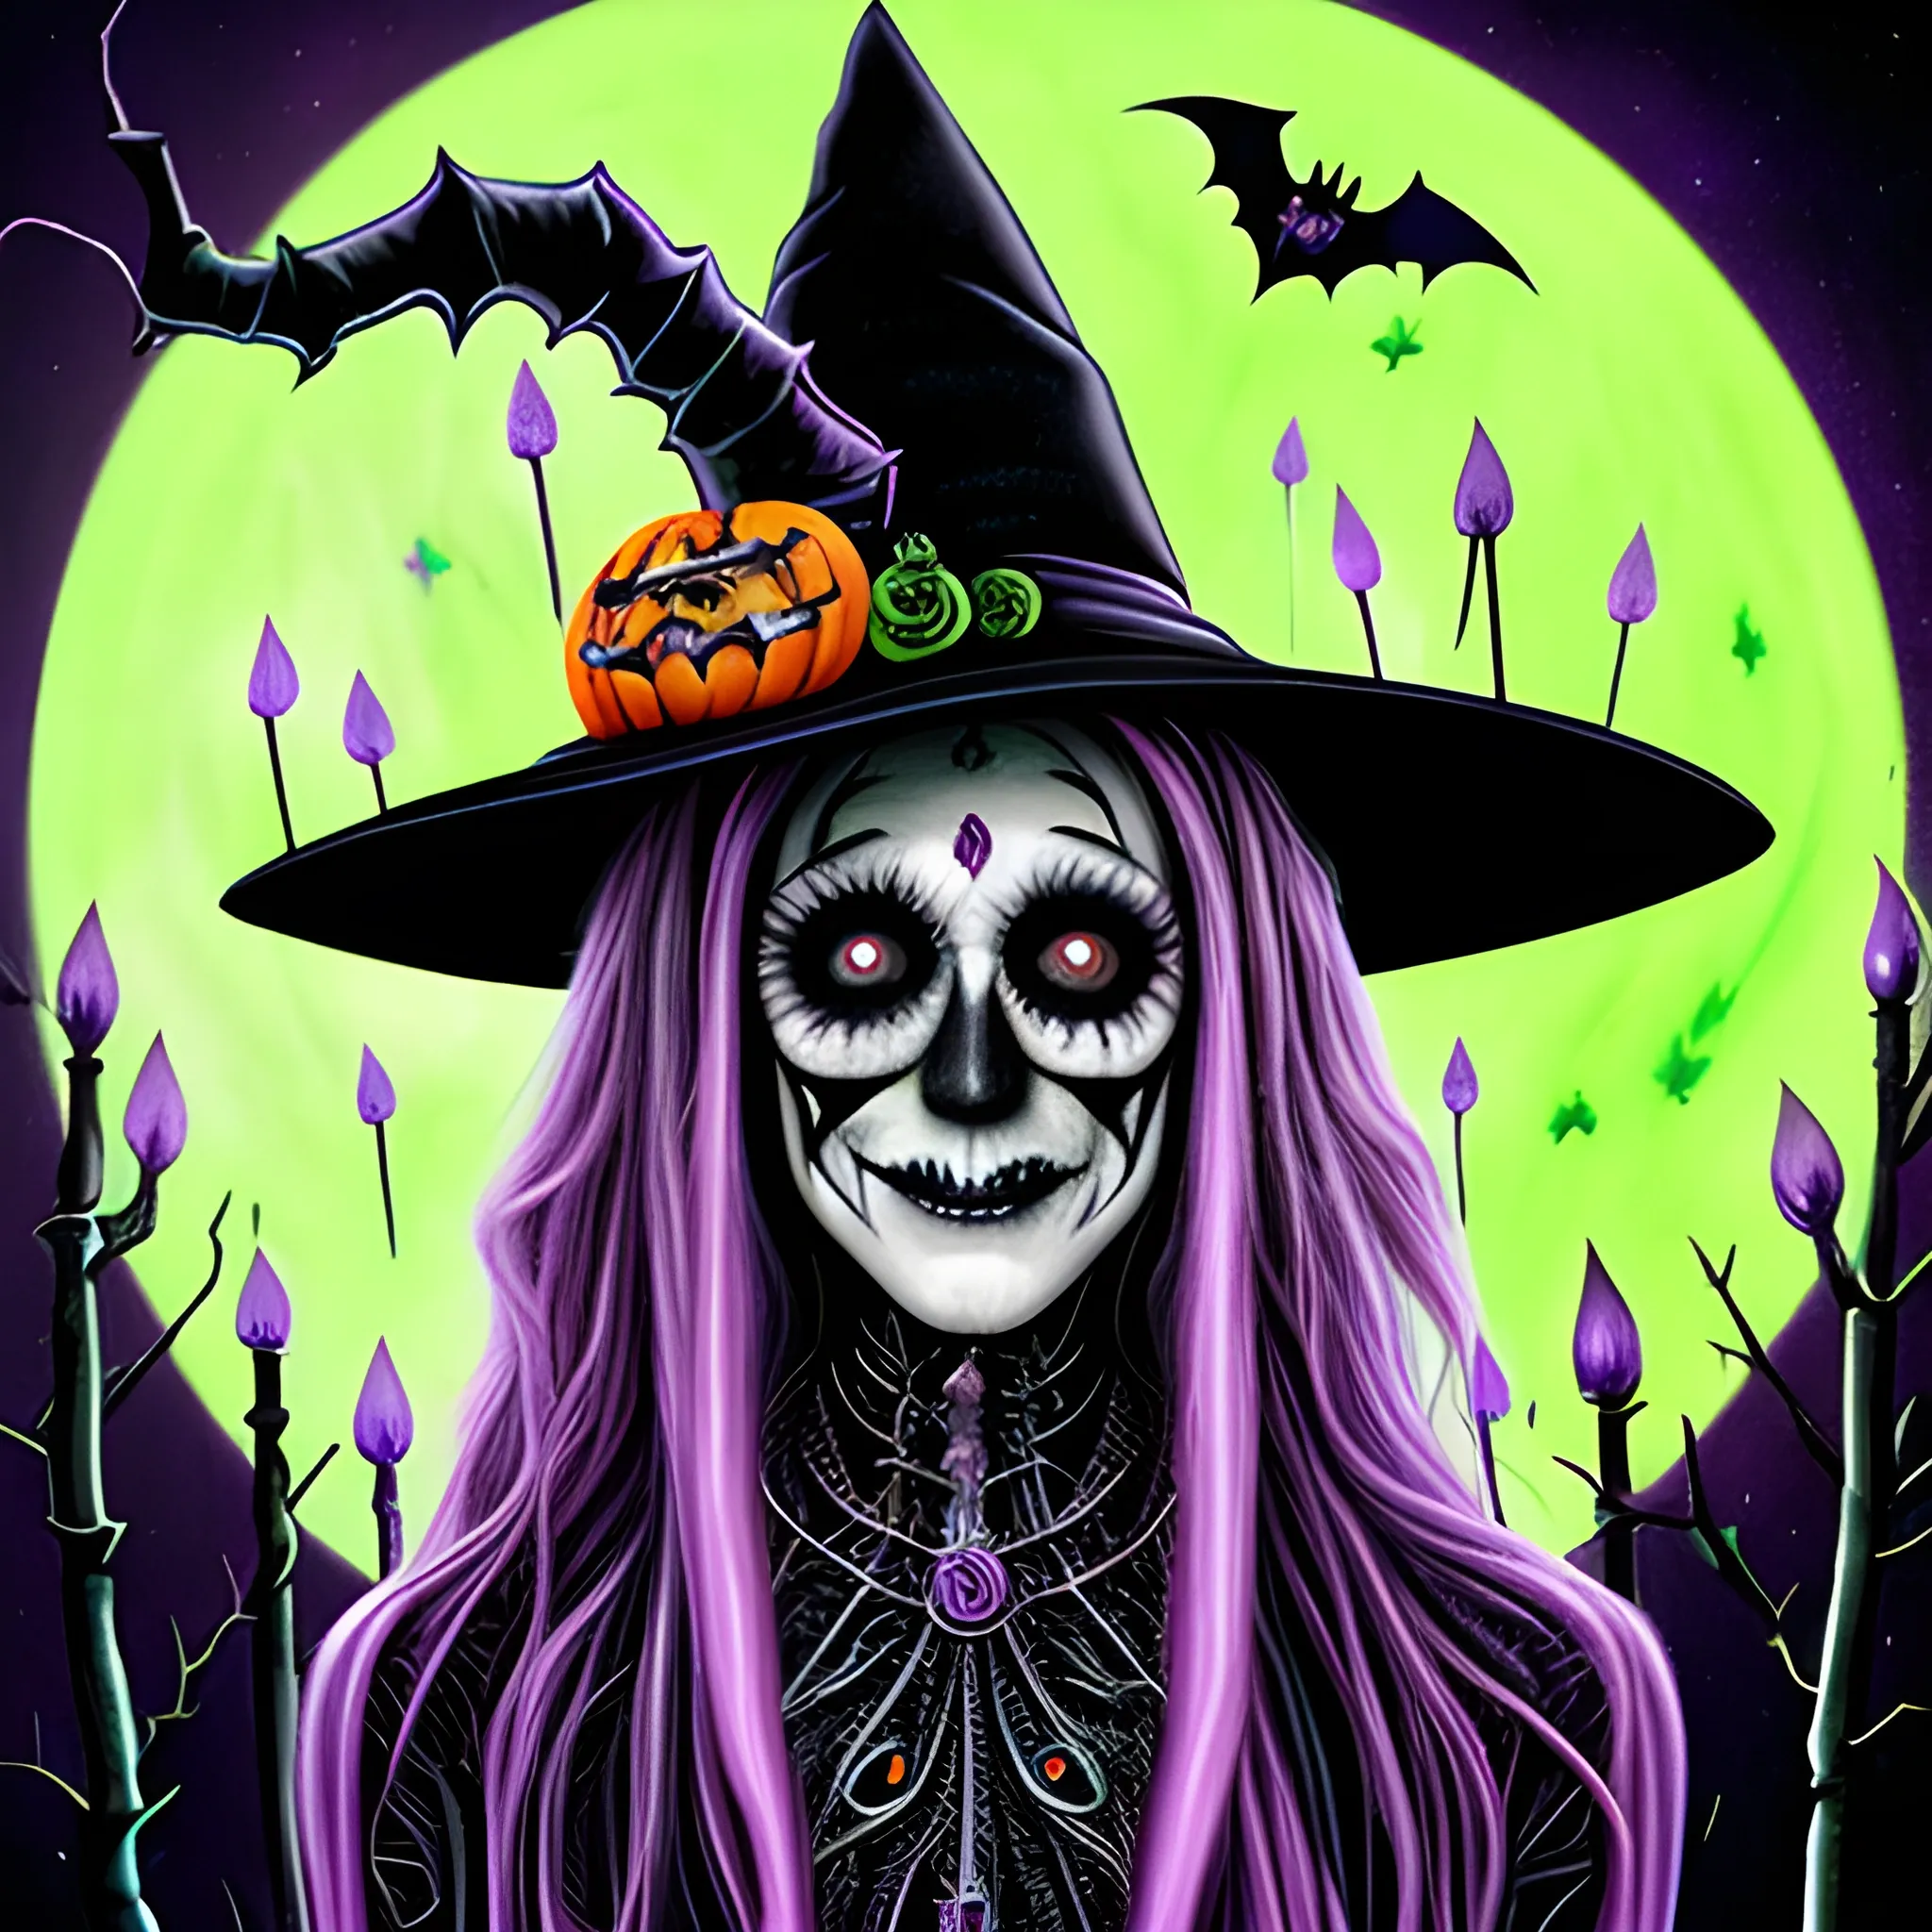 Sarah Jessica Parker as a Halloween Witch, wearing a thorny witch hat adorned with thorns and black roses; Halloween, bats, full moon in a nebula sky, neon spray paint, acrylic paint, fantastical surrealist world, in the style of Stephen Gammell, extremely detailed Zentangle style, sick, gothic, eldritch, candles, neon grape purple, dayglo orange, chartreuse green, Halloween